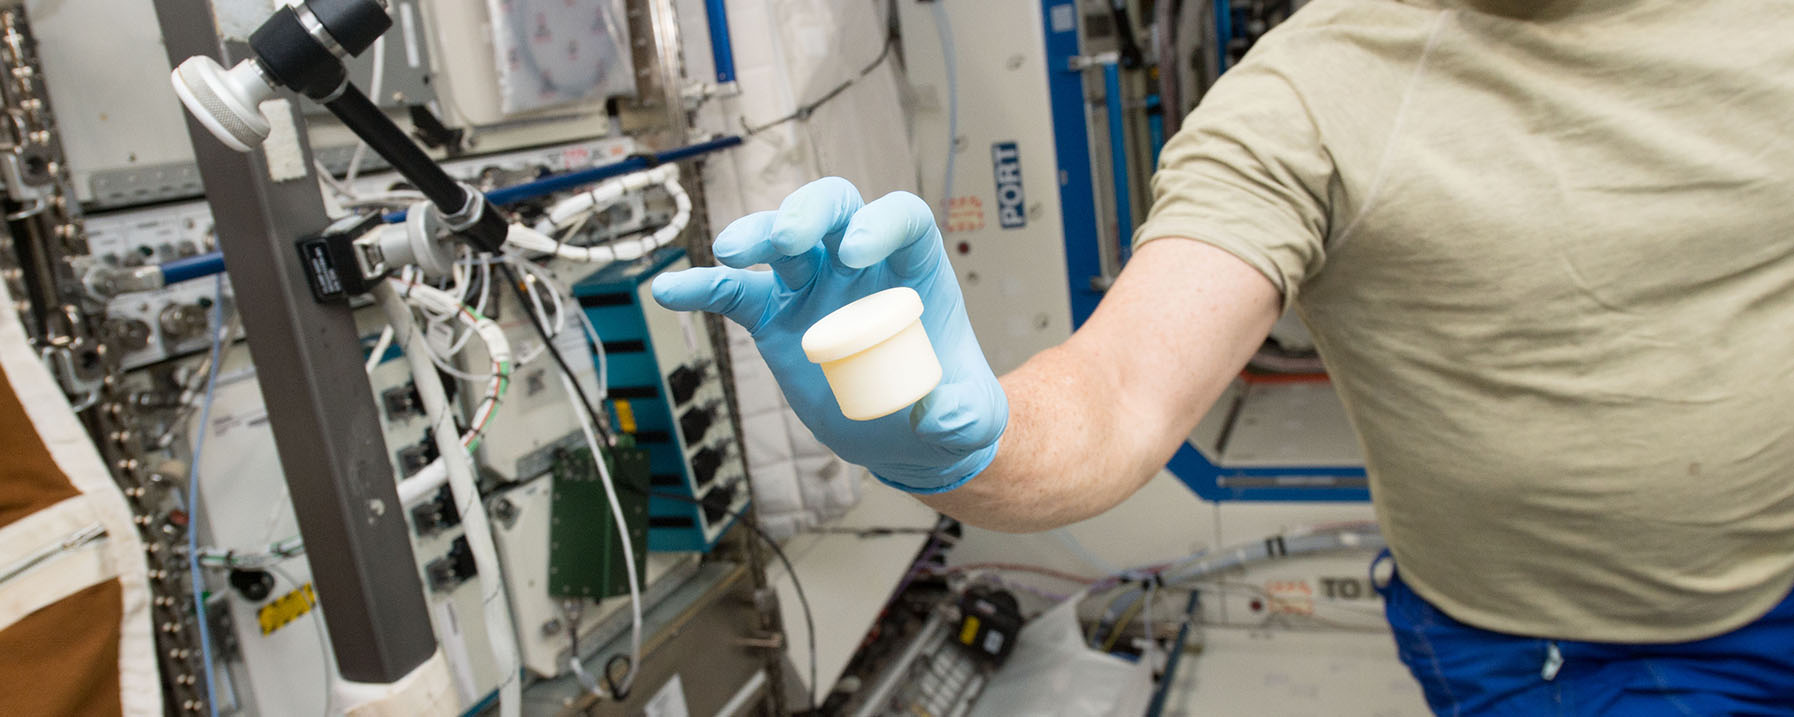 3-D Printed Article on ISS